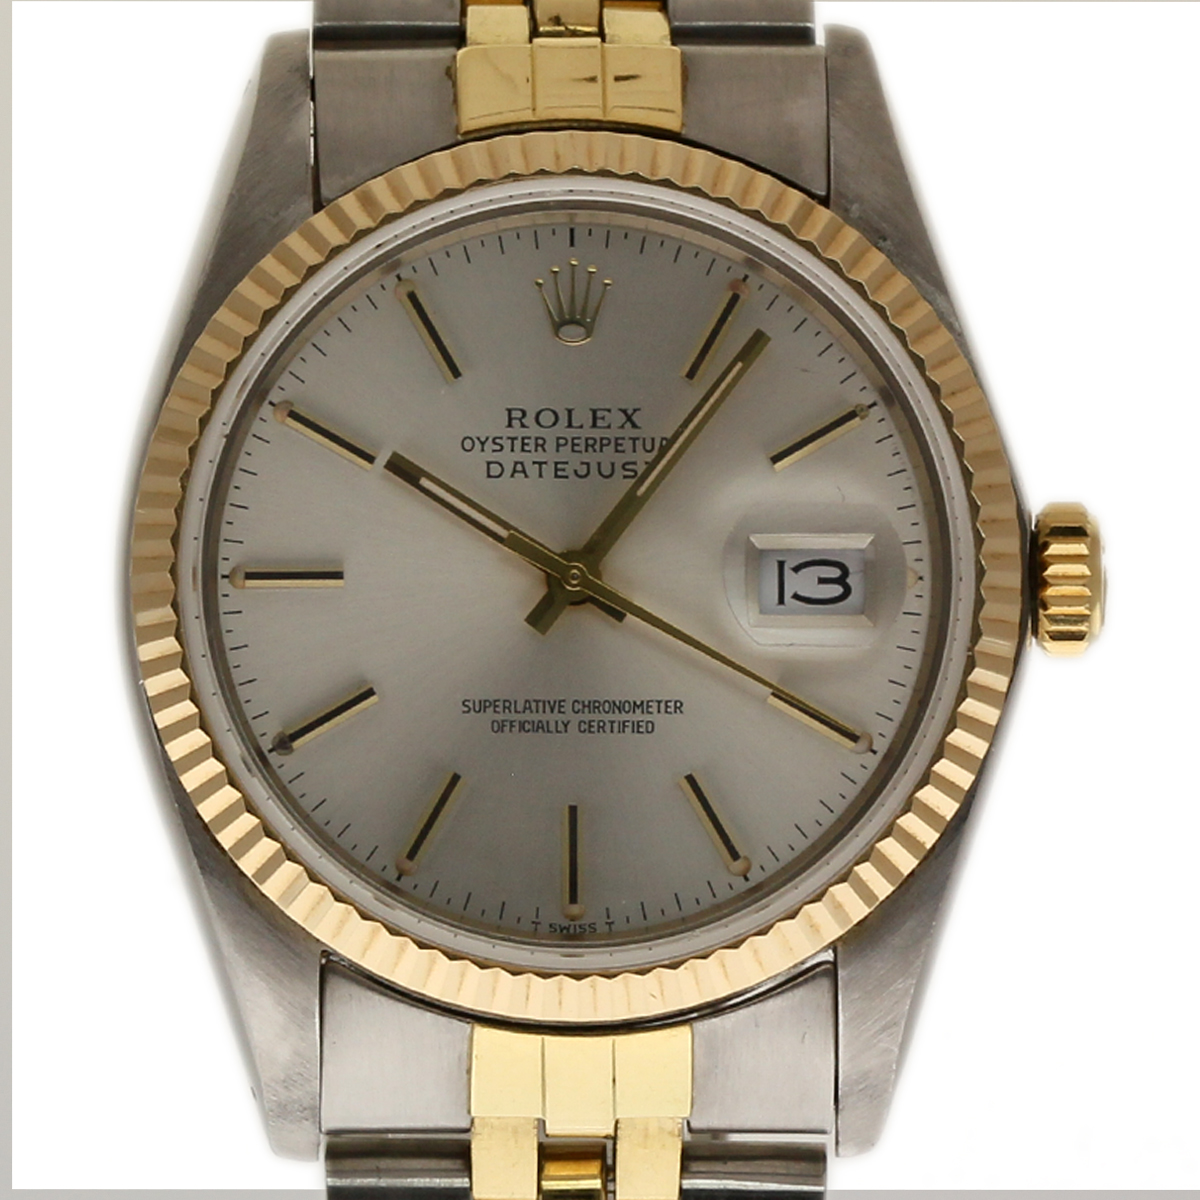 Datejust 36mm in 2-Tone Fluted Bezel on Jubilee Bracelet with Silver Index Dial